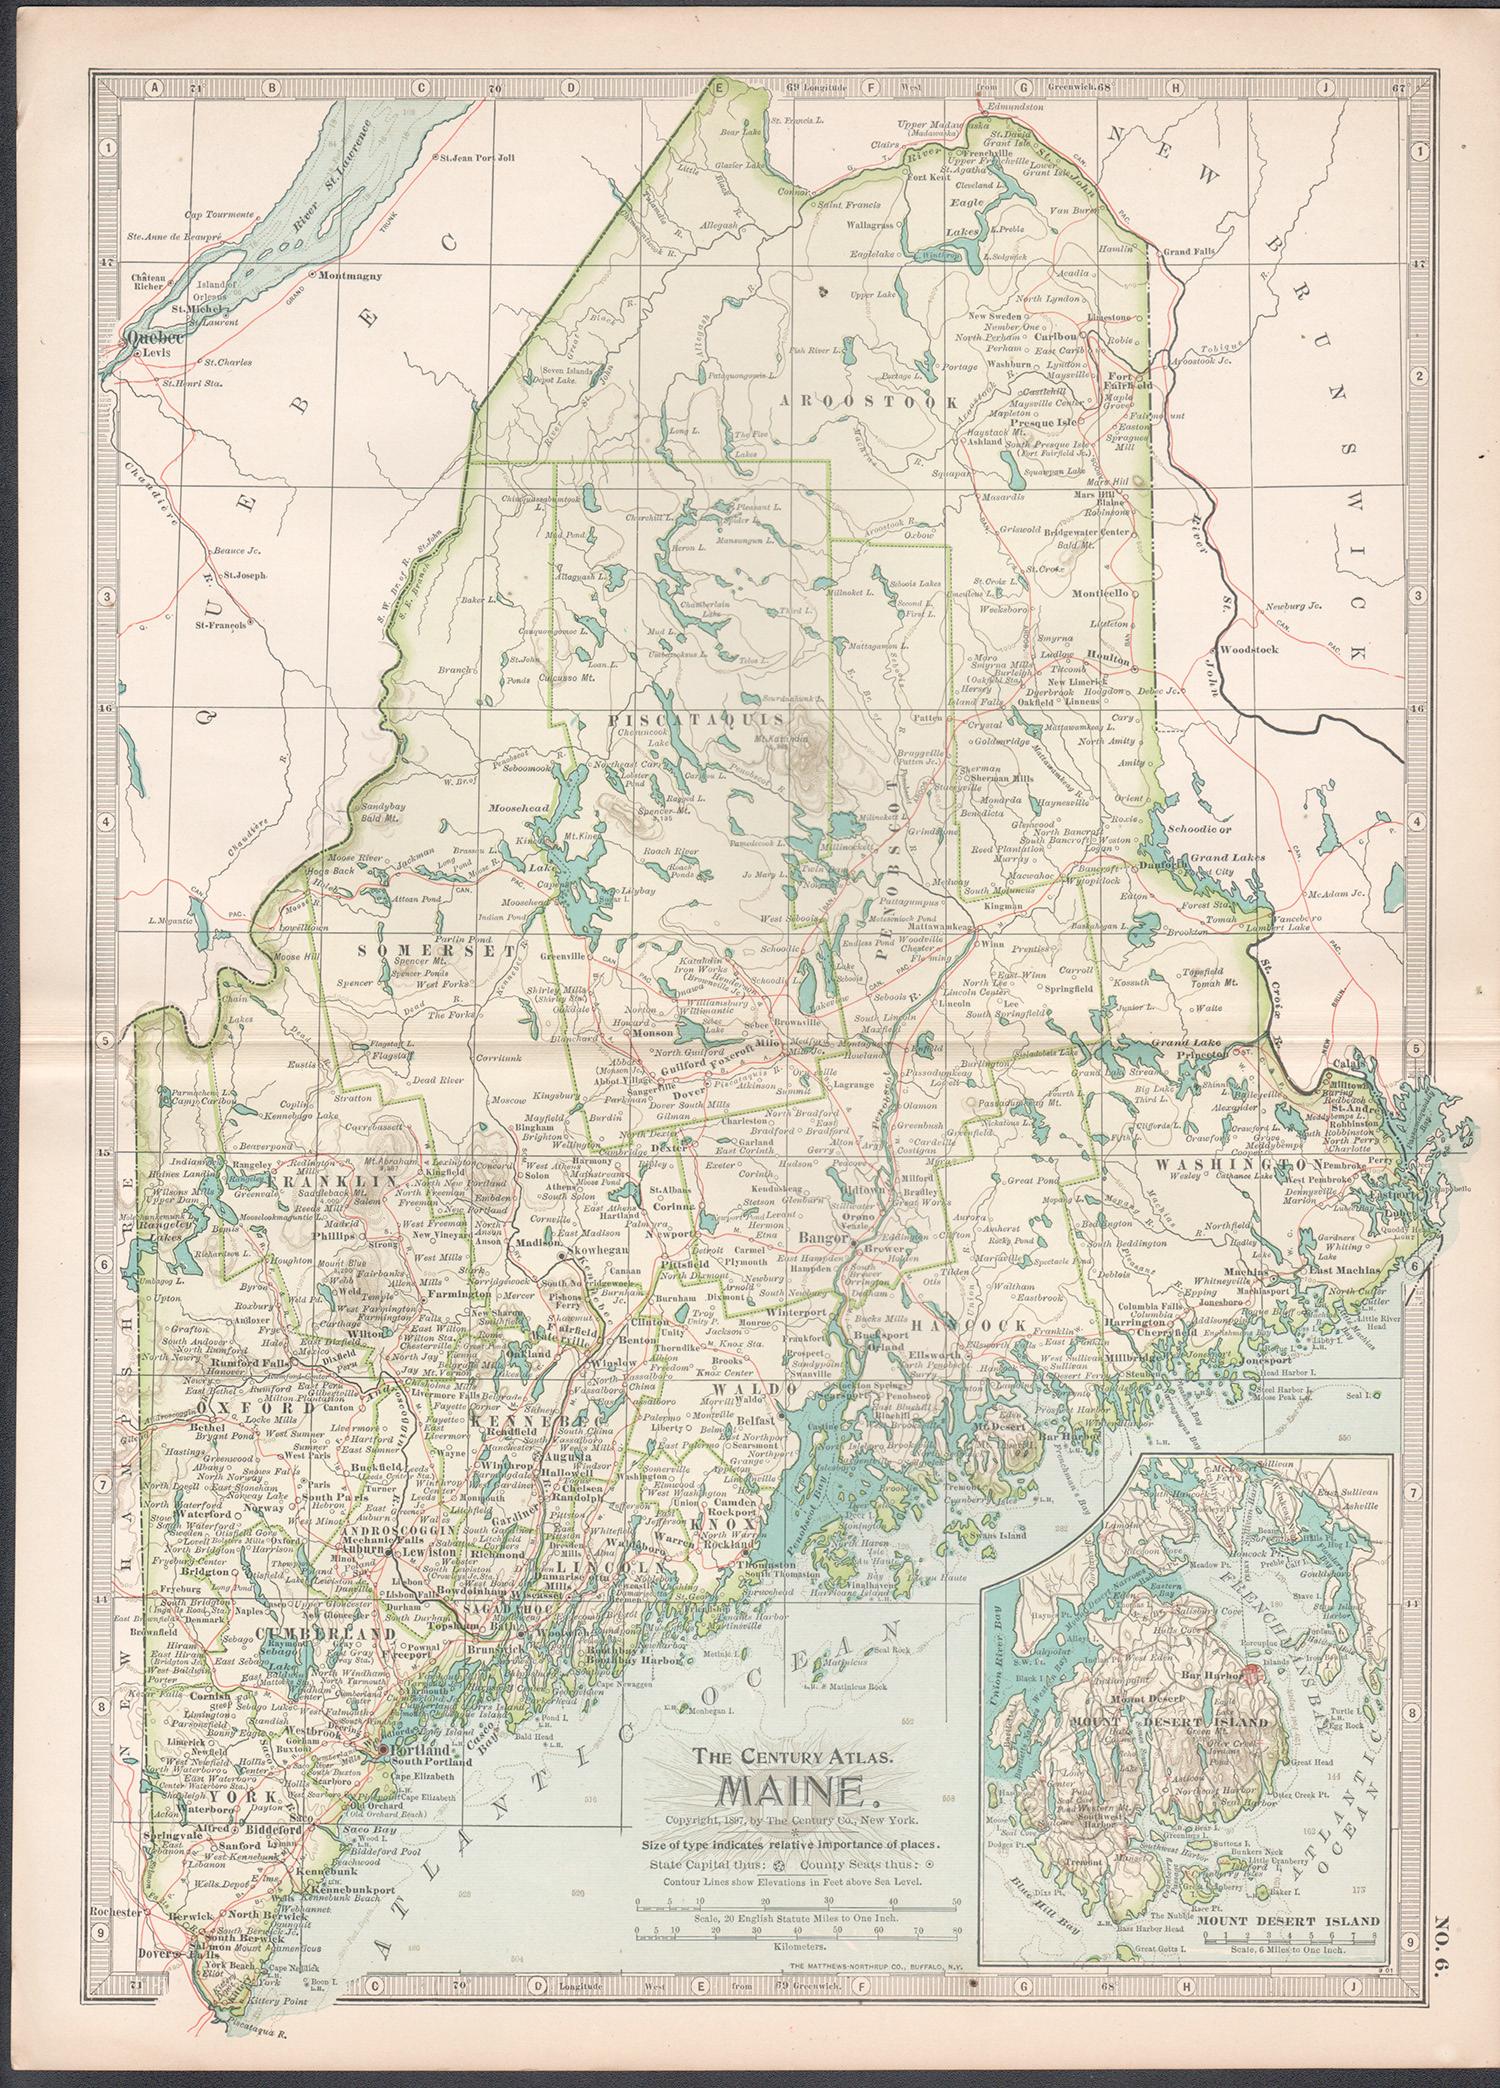 Maine. USA Century Atlas state antique vintage map - Print by Unknown